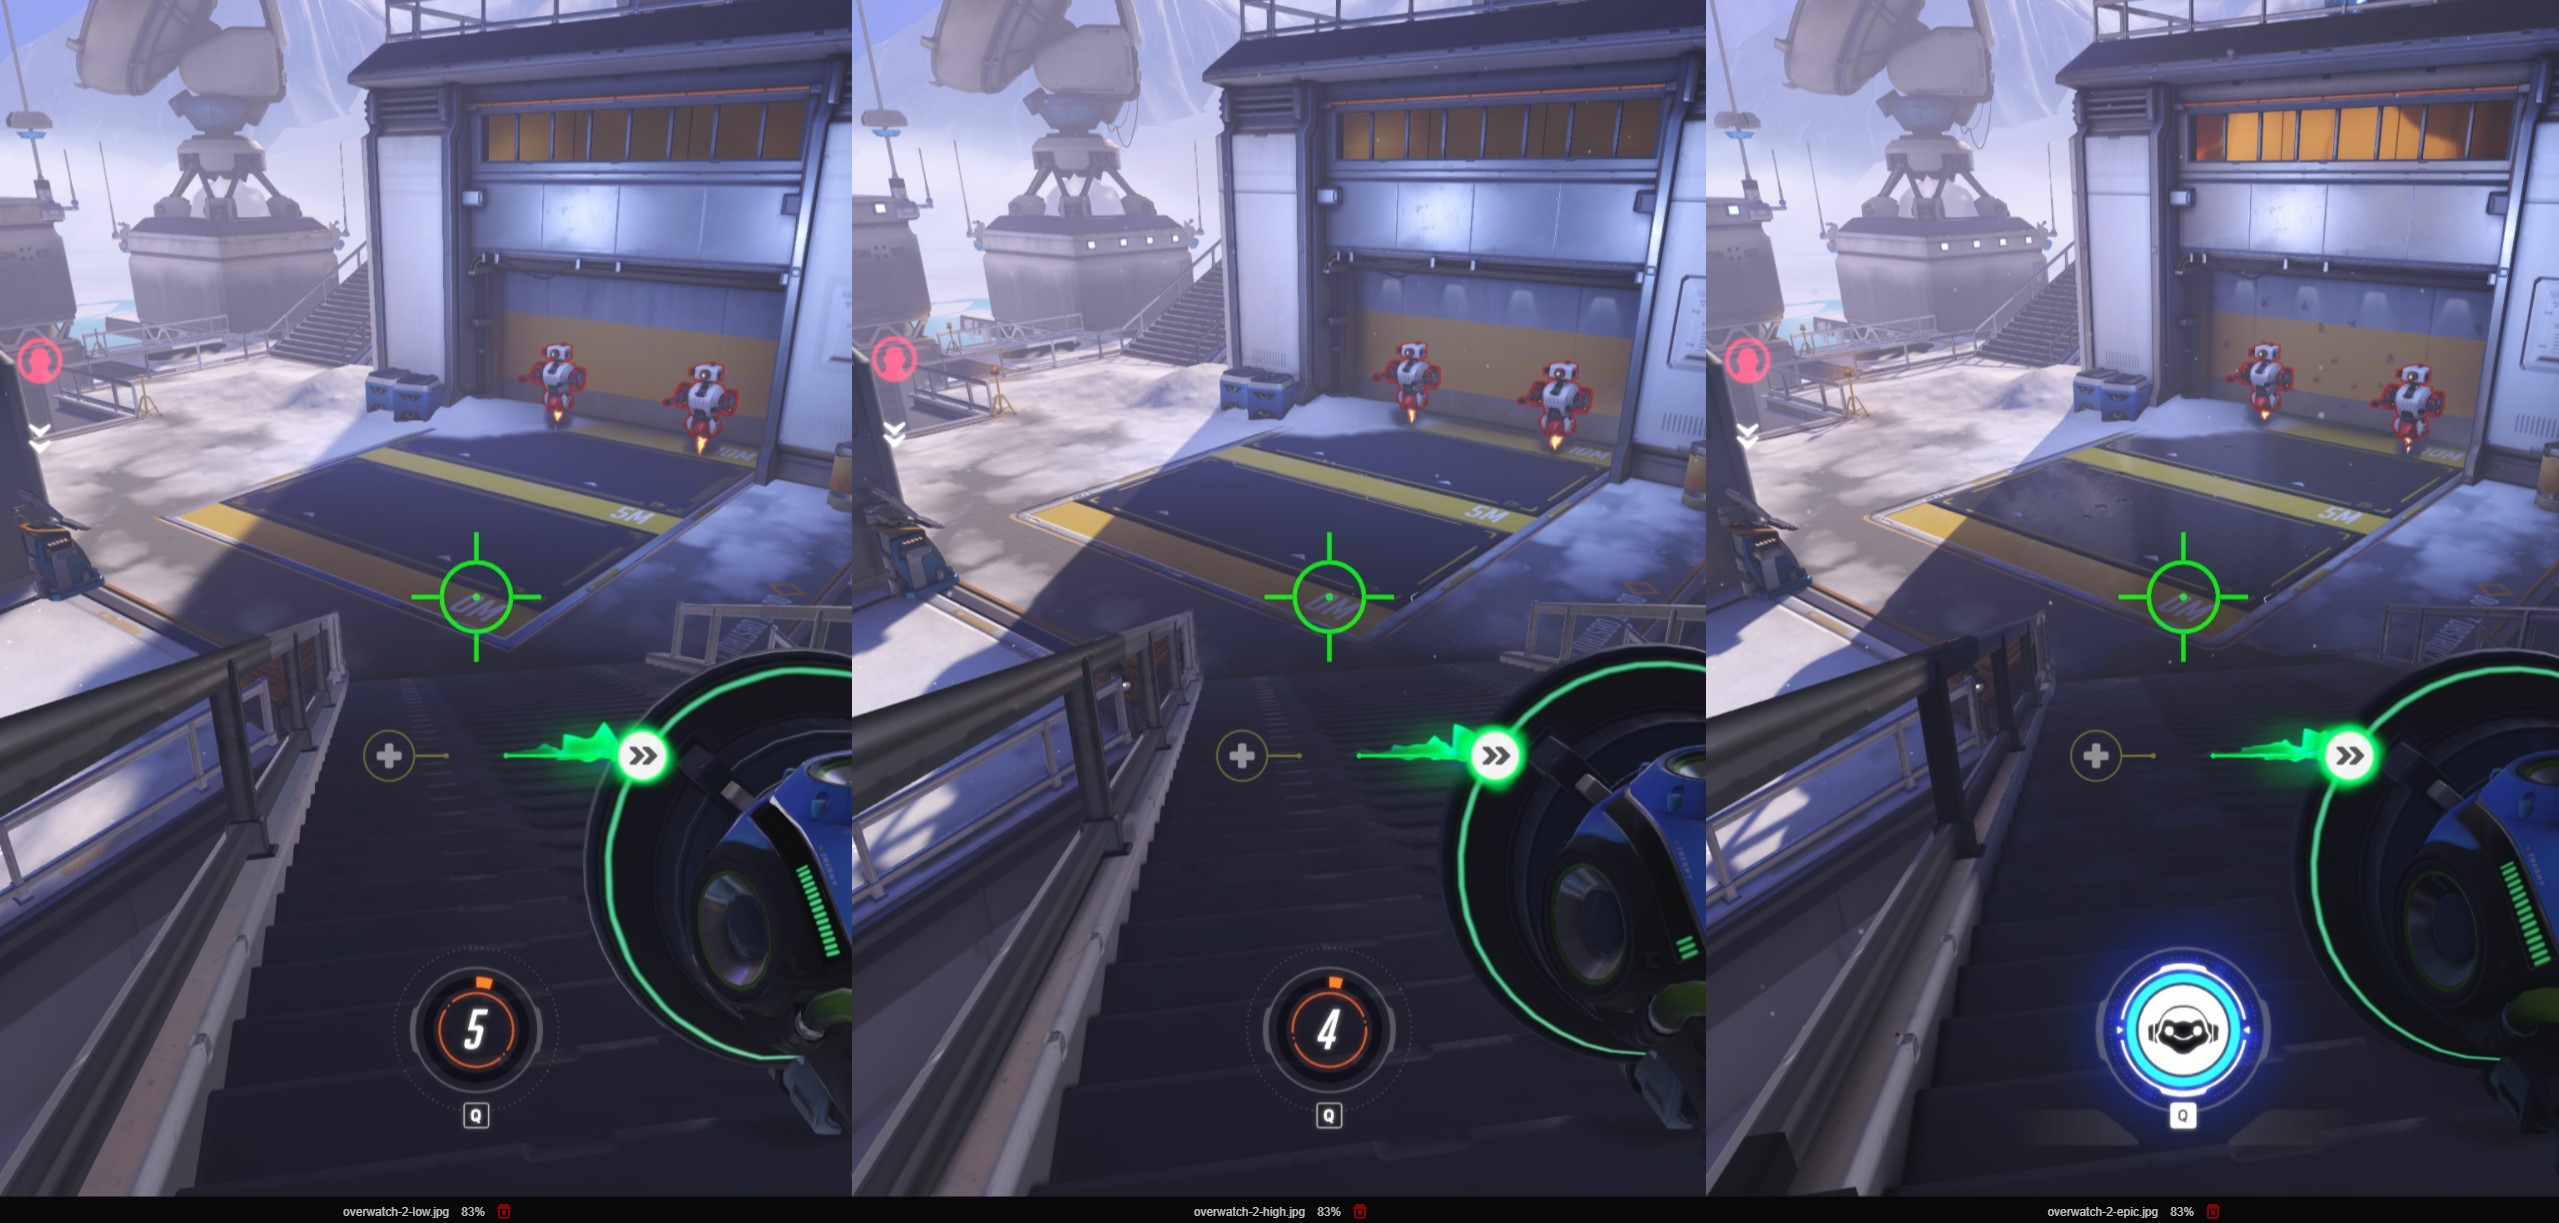 Image quality differences between Overwatch 2 presets.